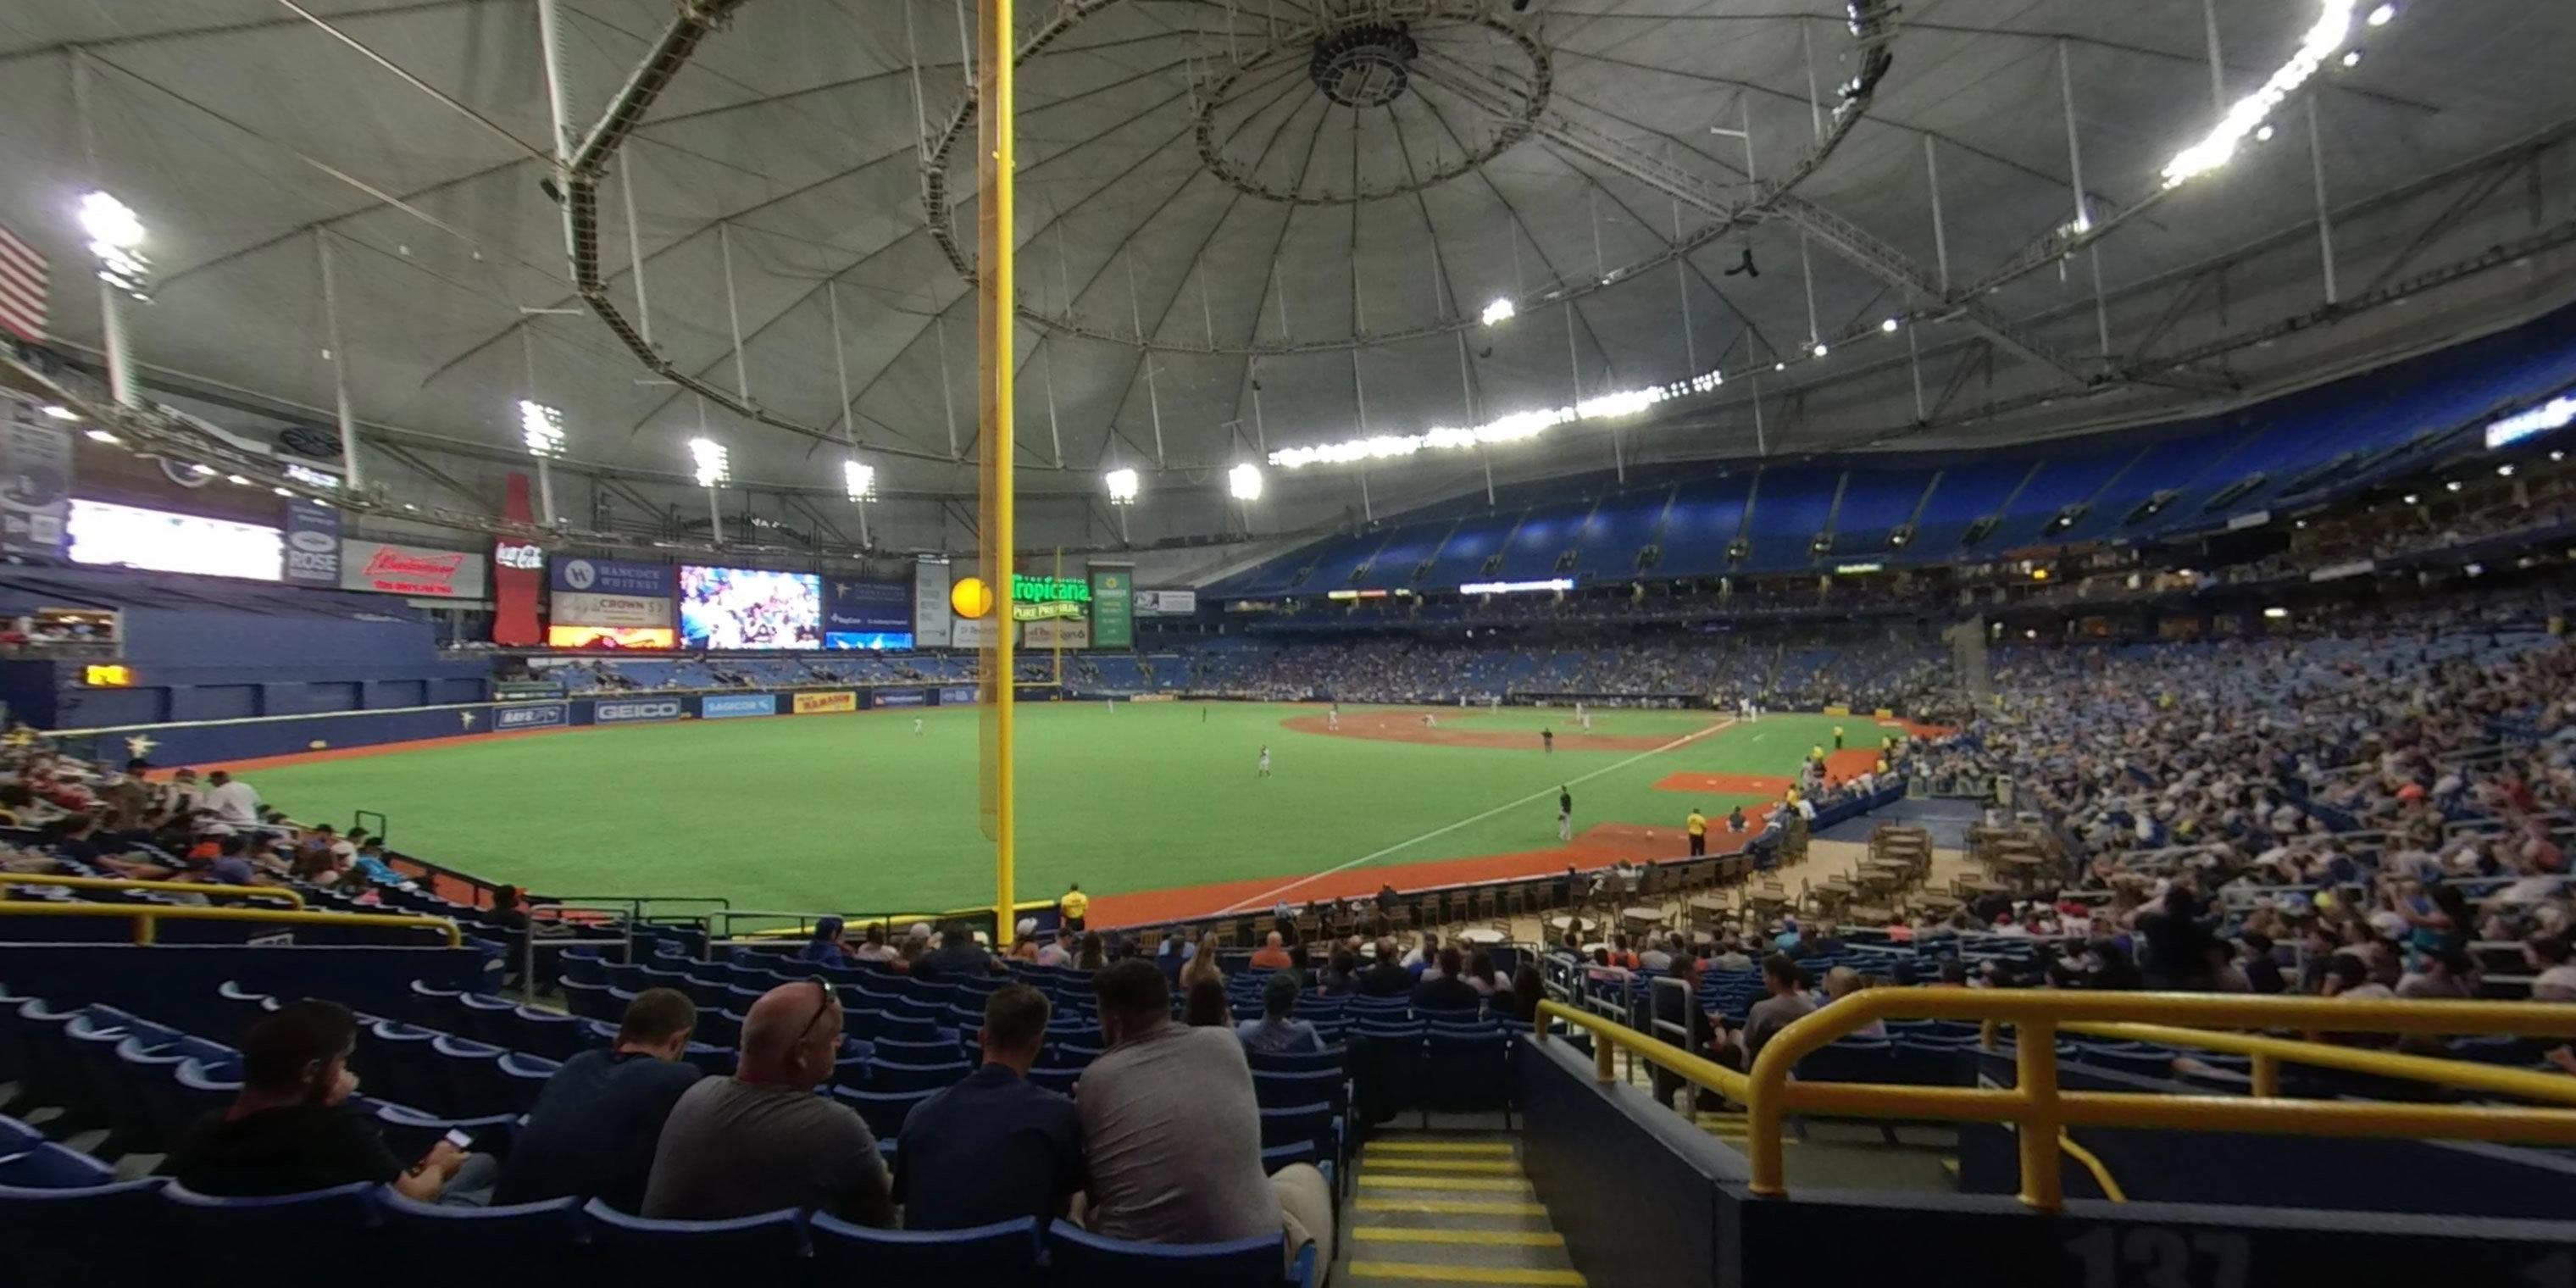 section 137 panoramic seat view  for baseball - tropicana field